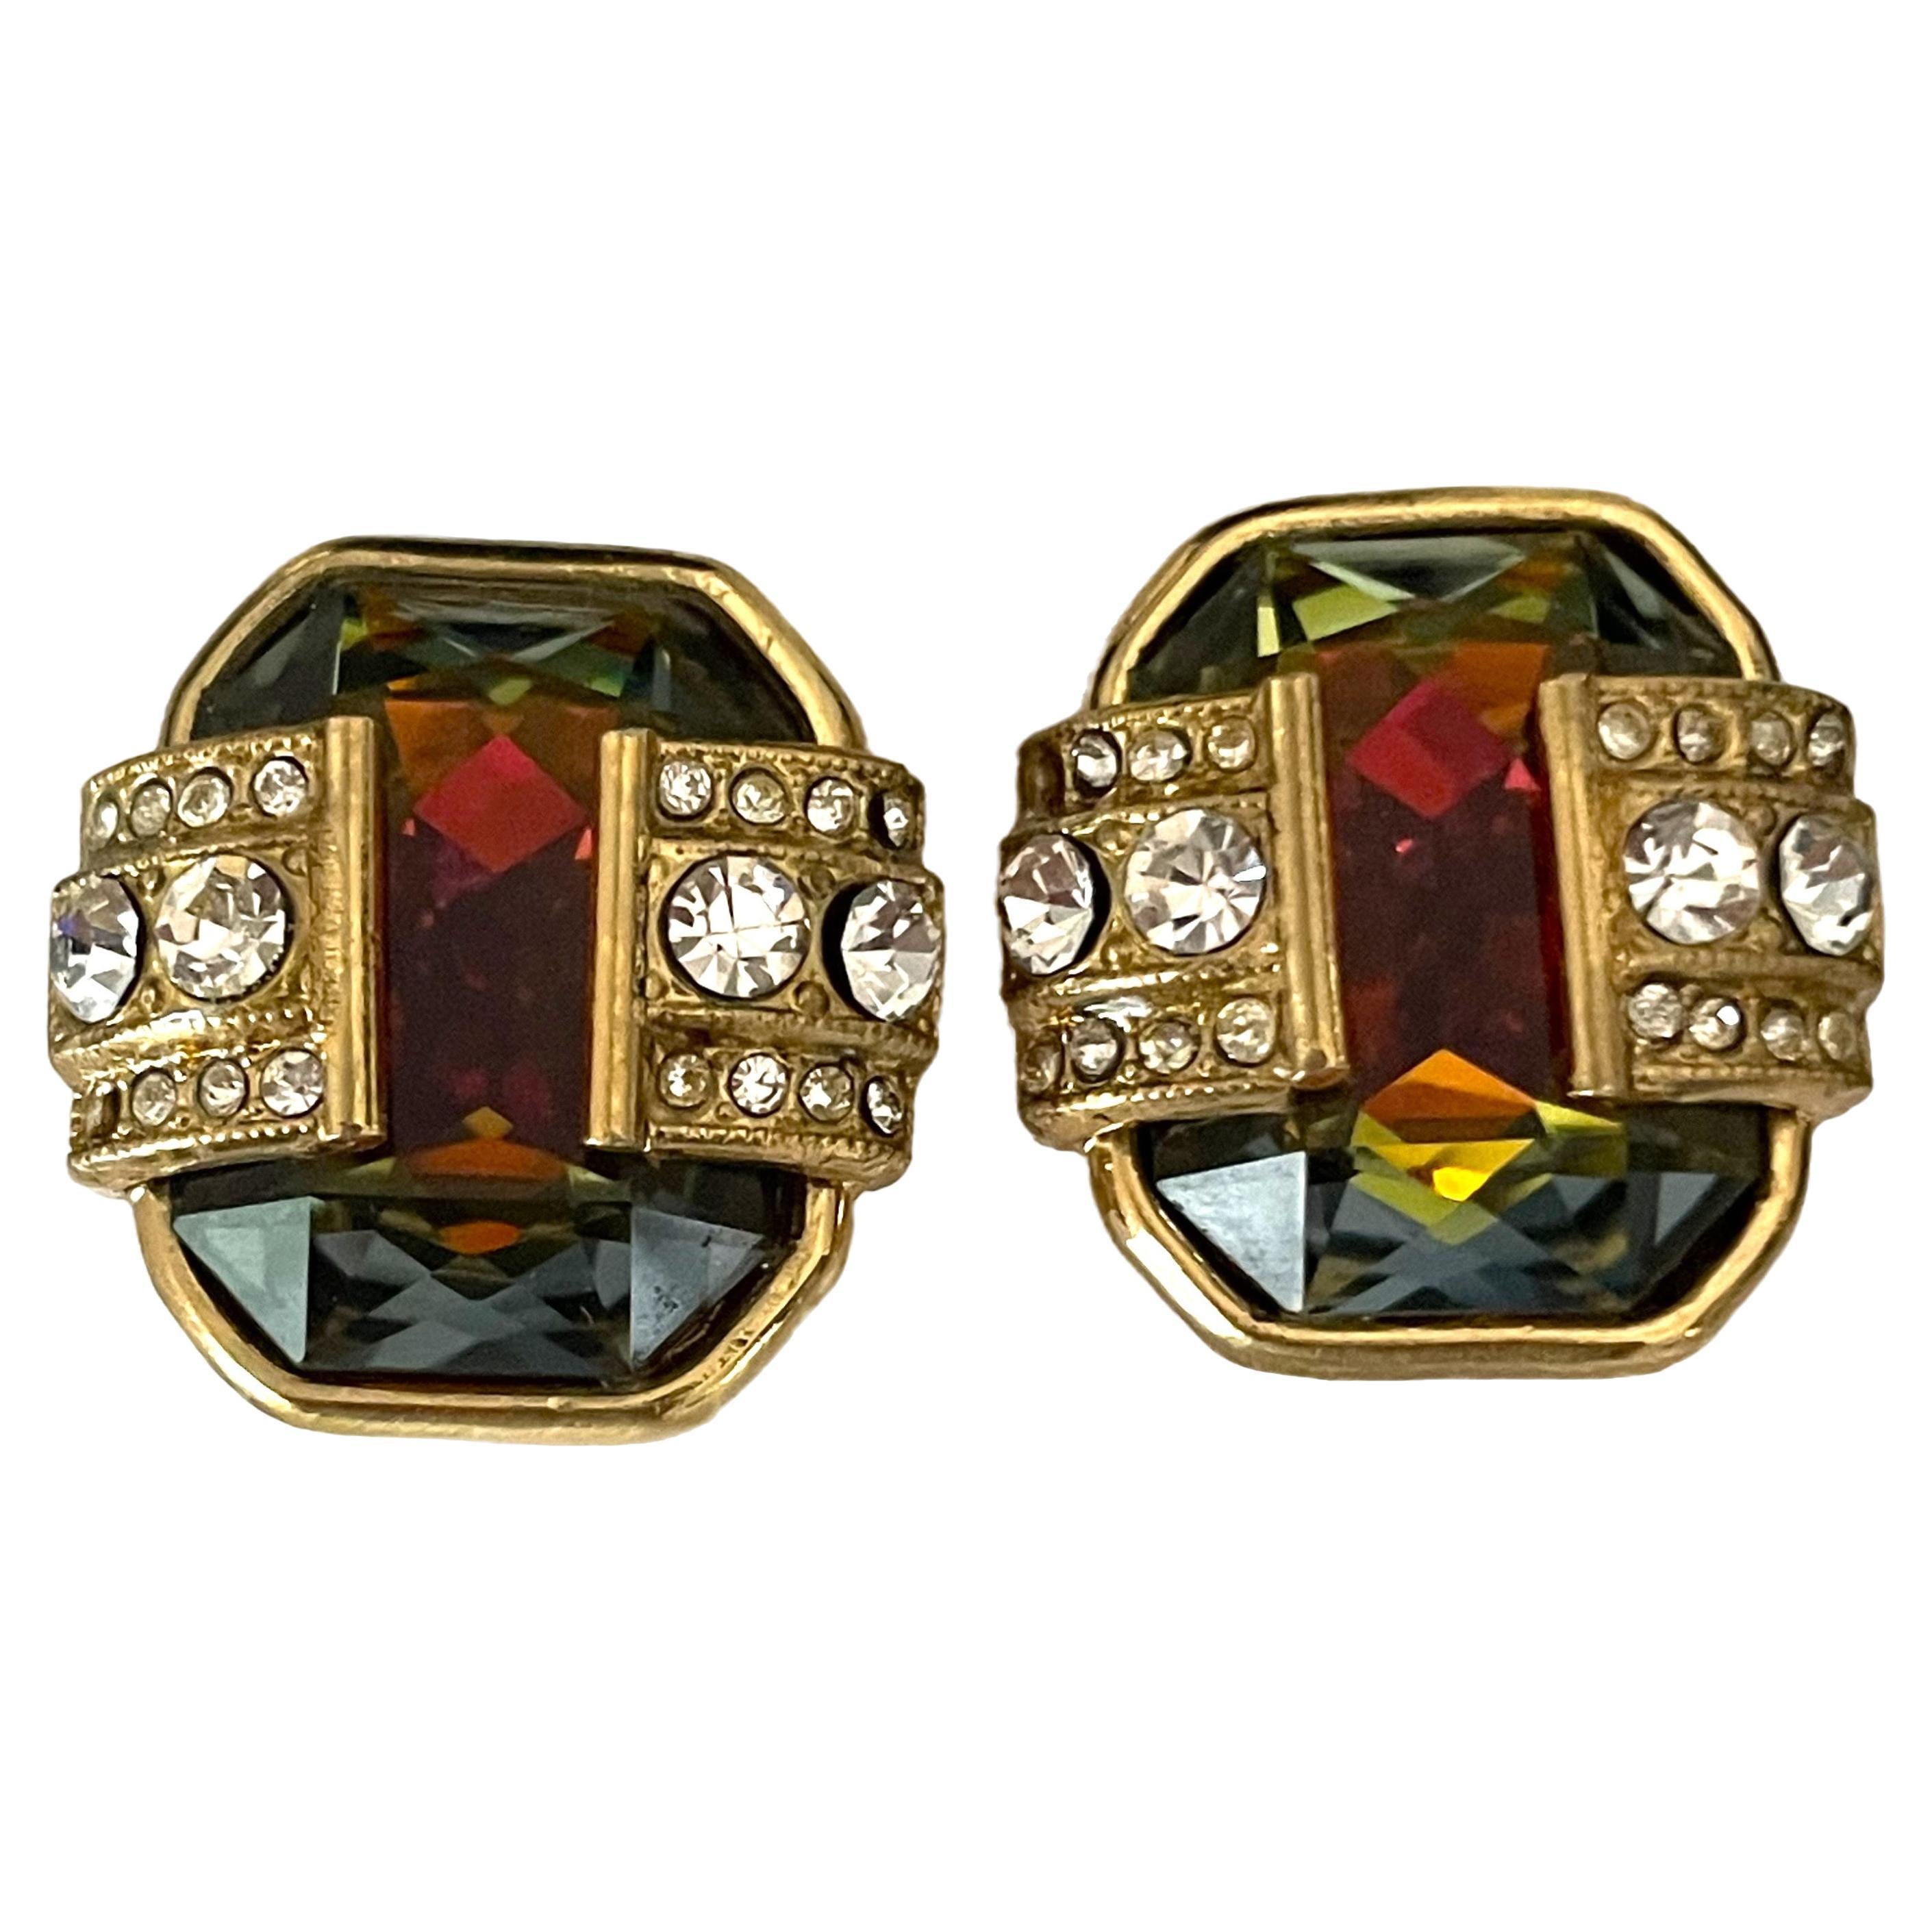 Very rare 90s Gianfranco Ferré gold-plaed clip on earrings with beautiful colours. A real statement piece that blend modernity with classic elegance. Dazzling and elegant with a touch of glamour and sophistication to the design, reflecting Ferré's